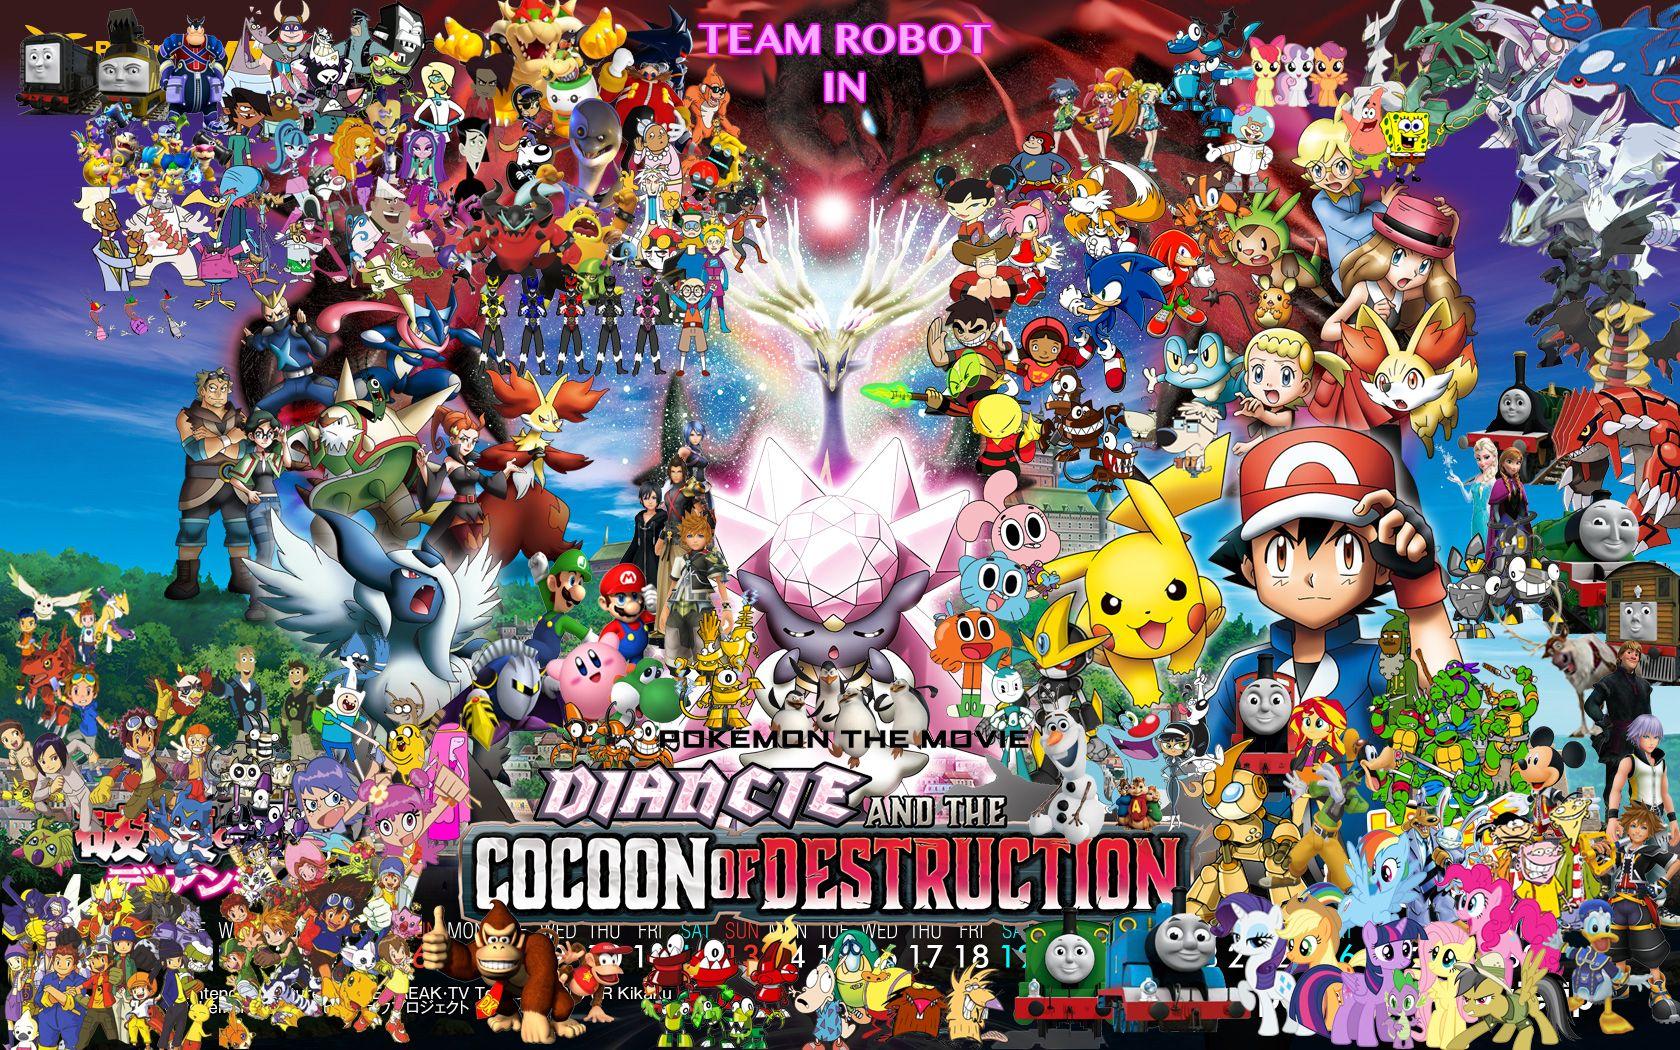 Team Robot in Pokemon: Diancie & The Cocoon of Destruction. Pooh's